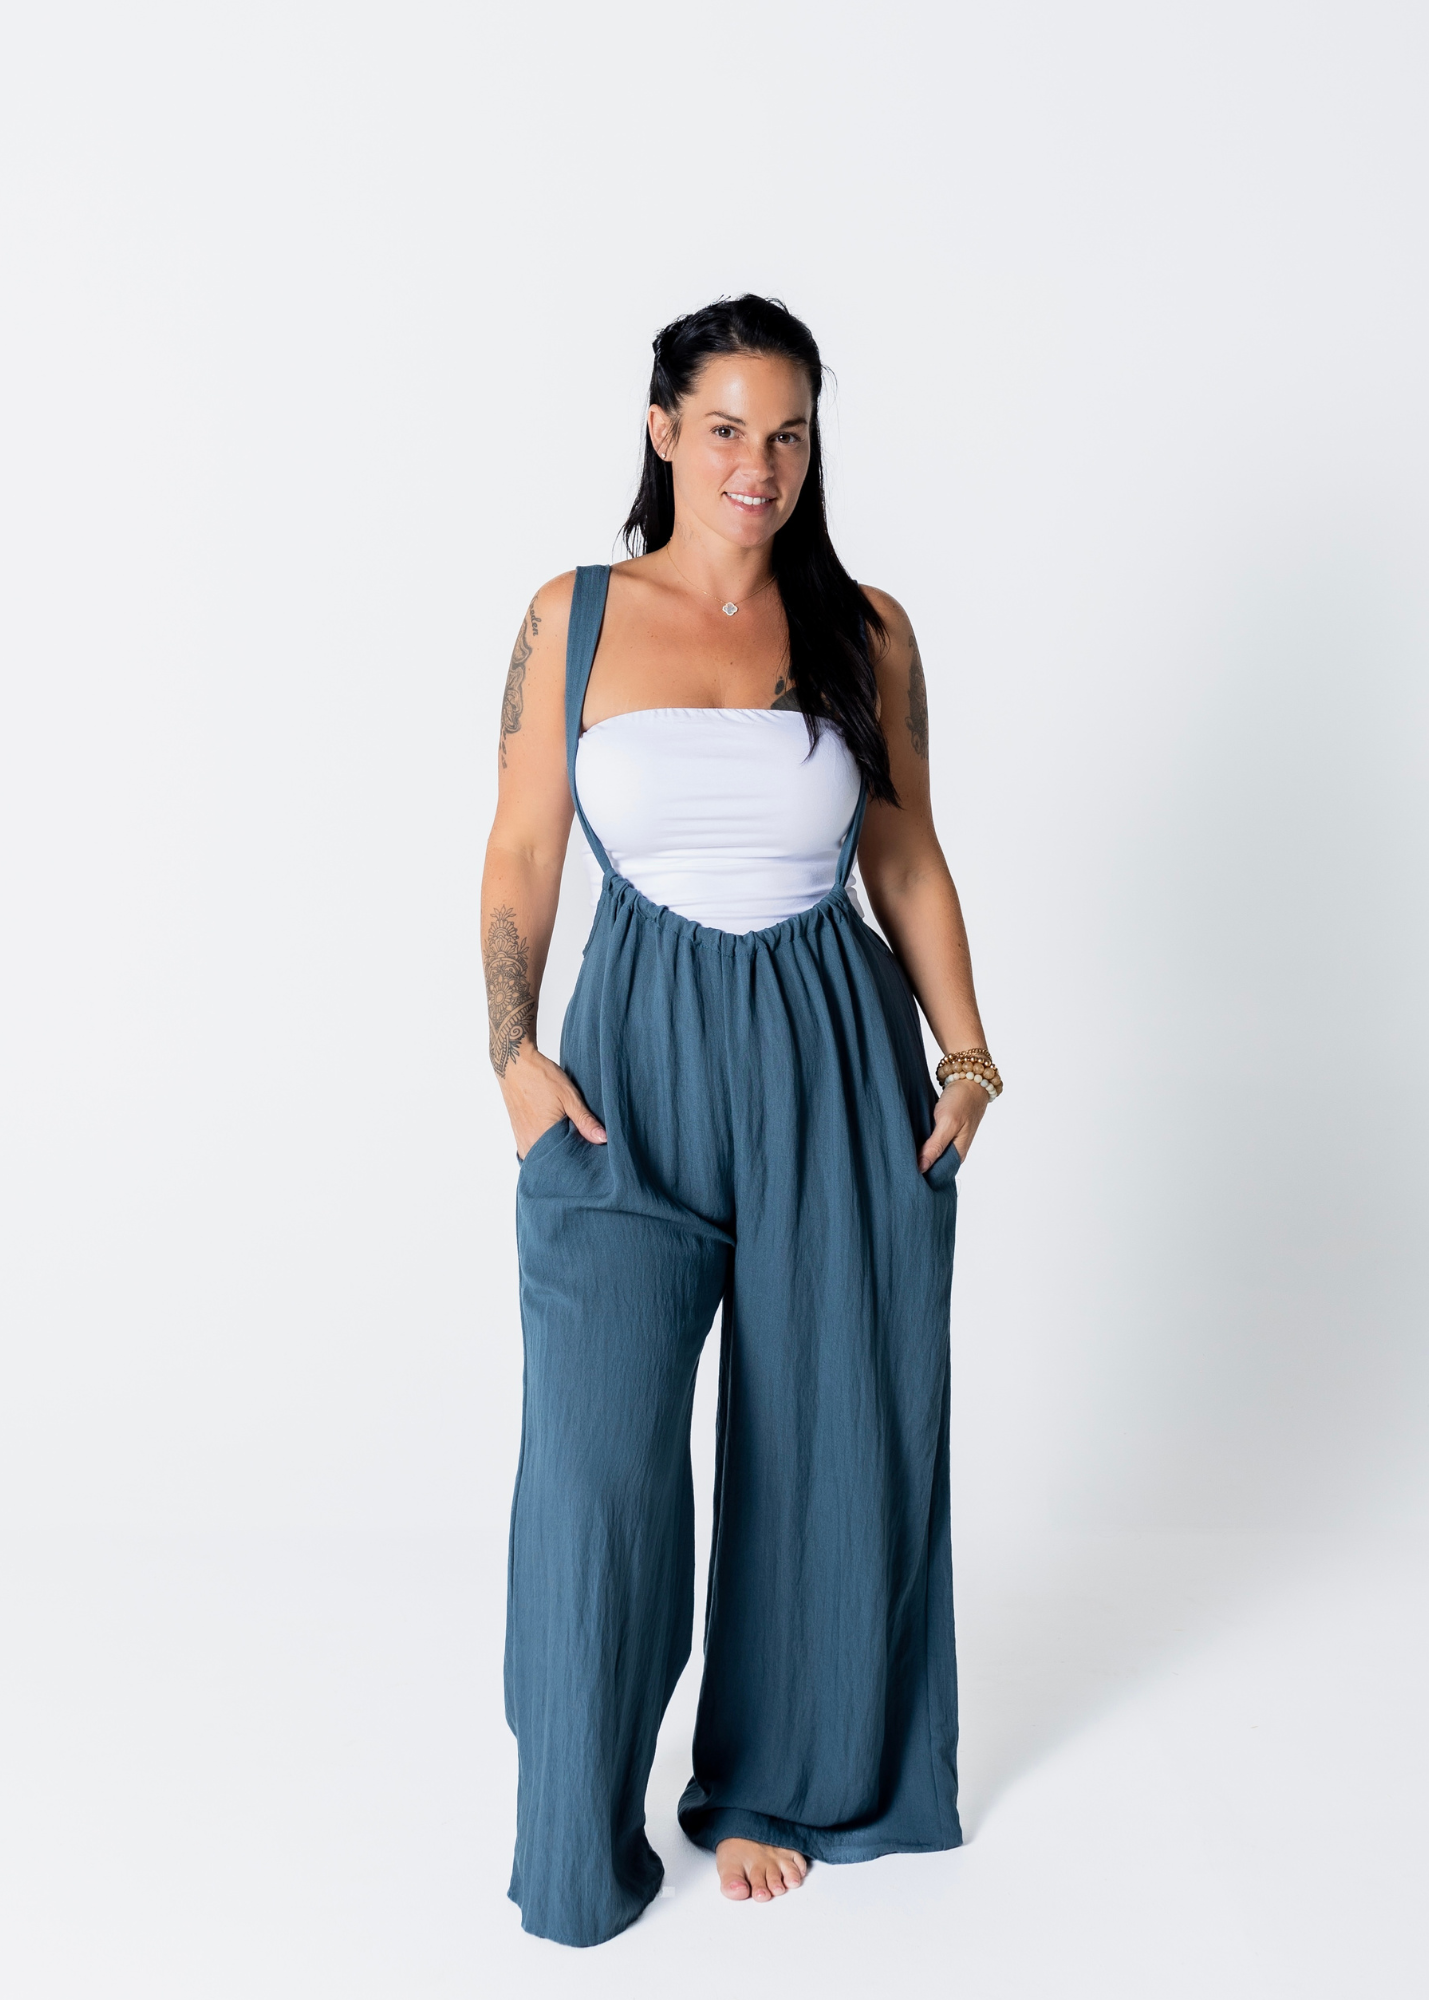 Sexy Suspender Flattering Plus Size Jumpsuits For Women Slim Fit Rompers  From Europe And The United States From Crazyshoppingstreet, $15.79 |  DHgate.Com